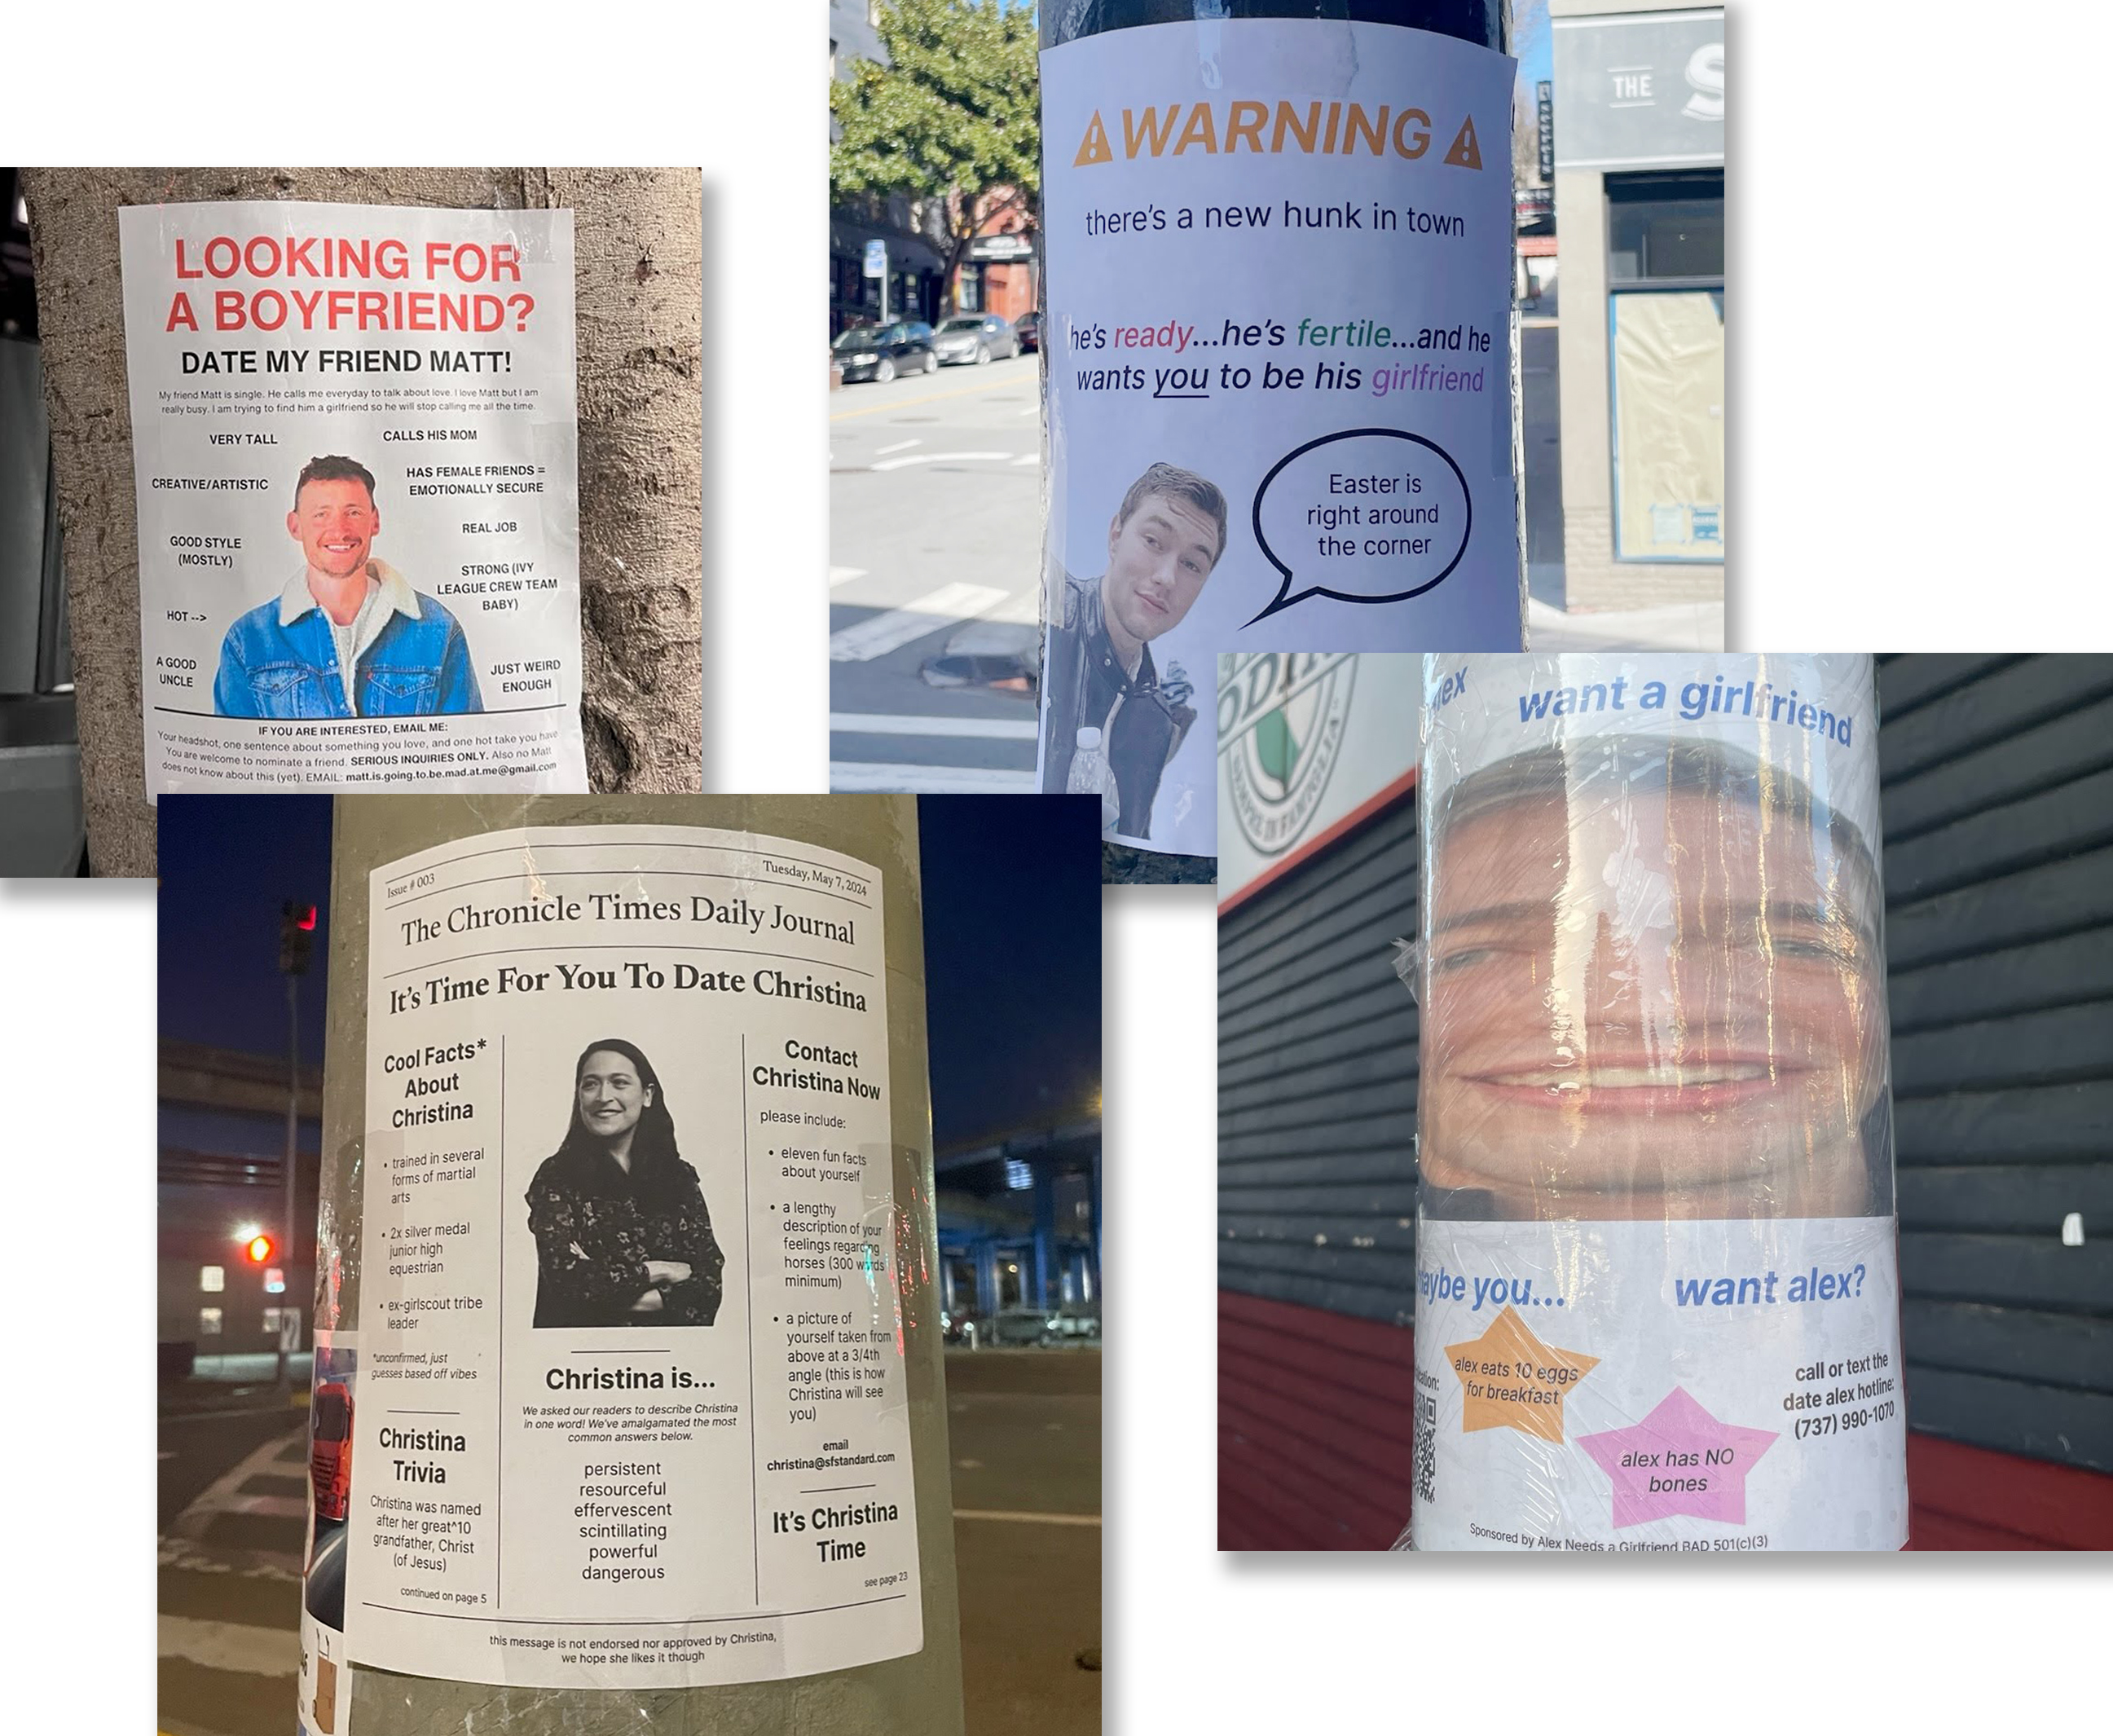 The image shows various humorous flyers posted in public spaces, each advertising a person as a potential date using quirky slogans and personal trivia.